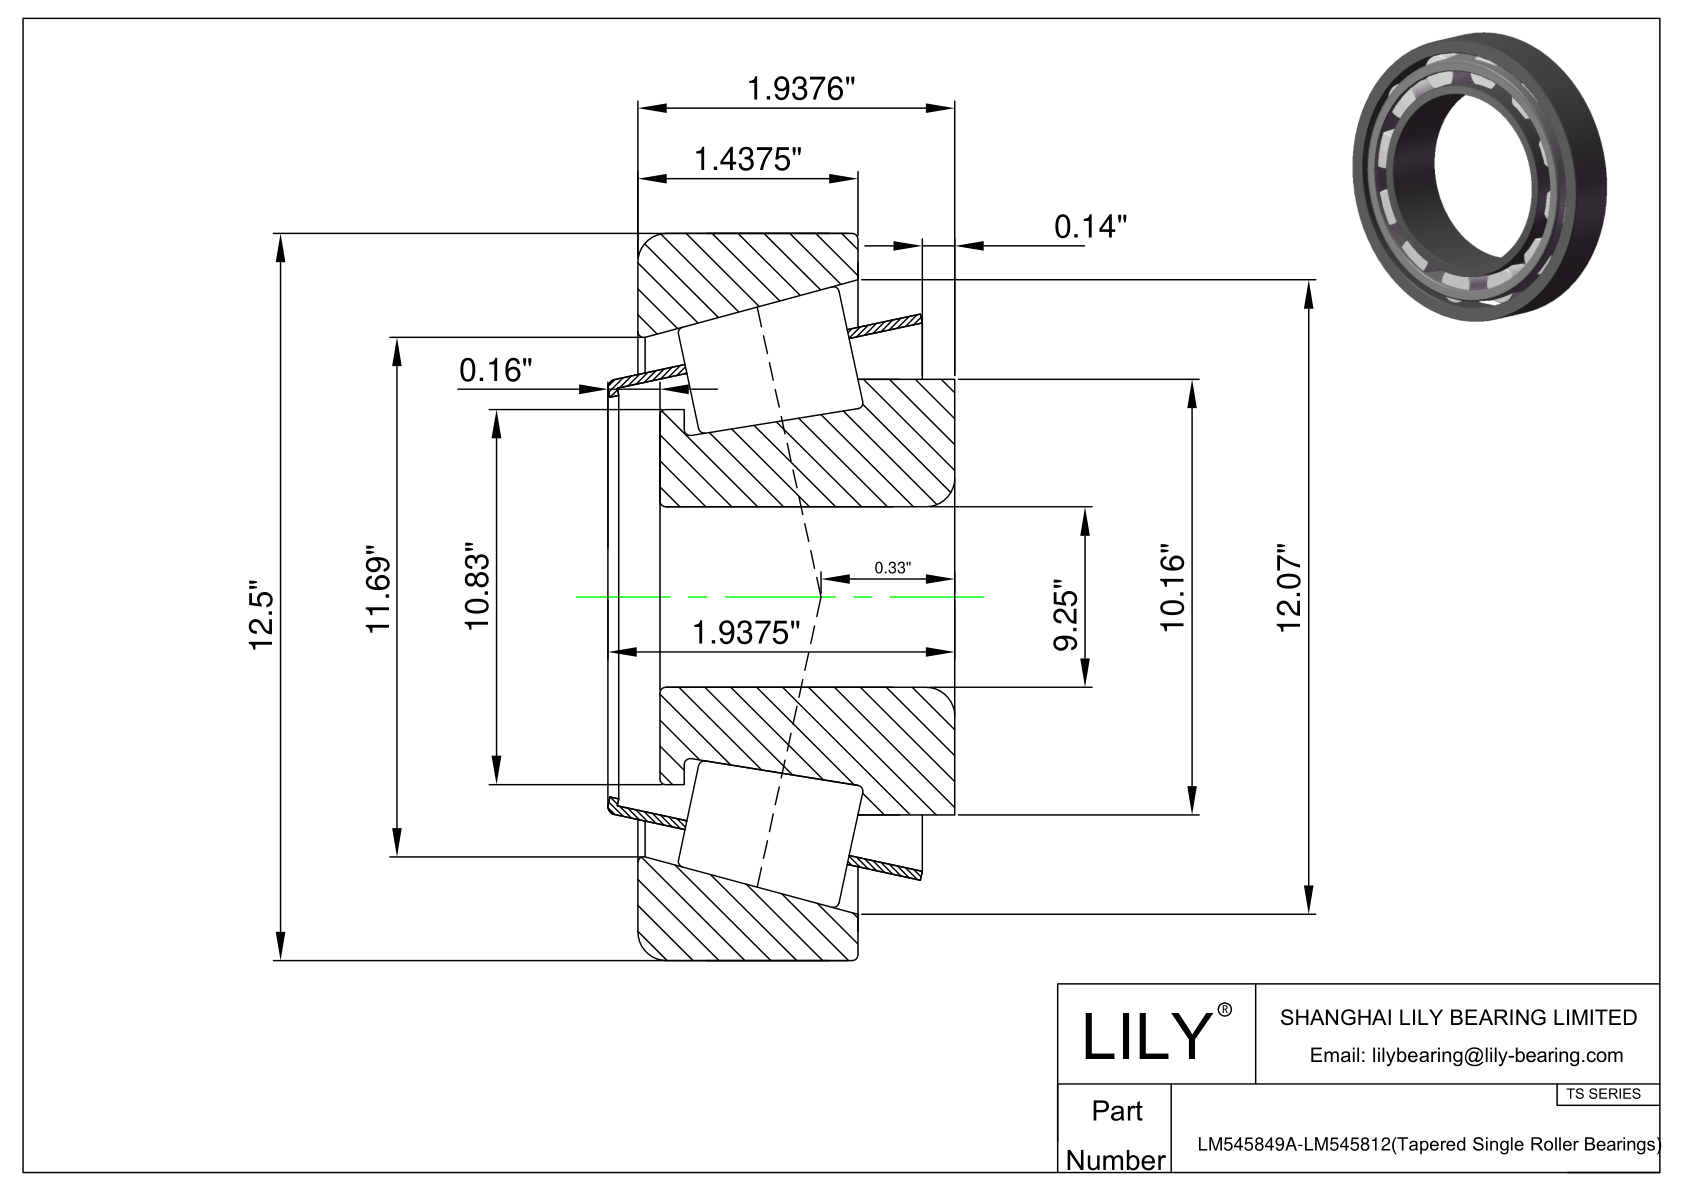 LM545849A-LM545812 TS (Tapered Single Roller Bearings) (Imperial) cad drawing